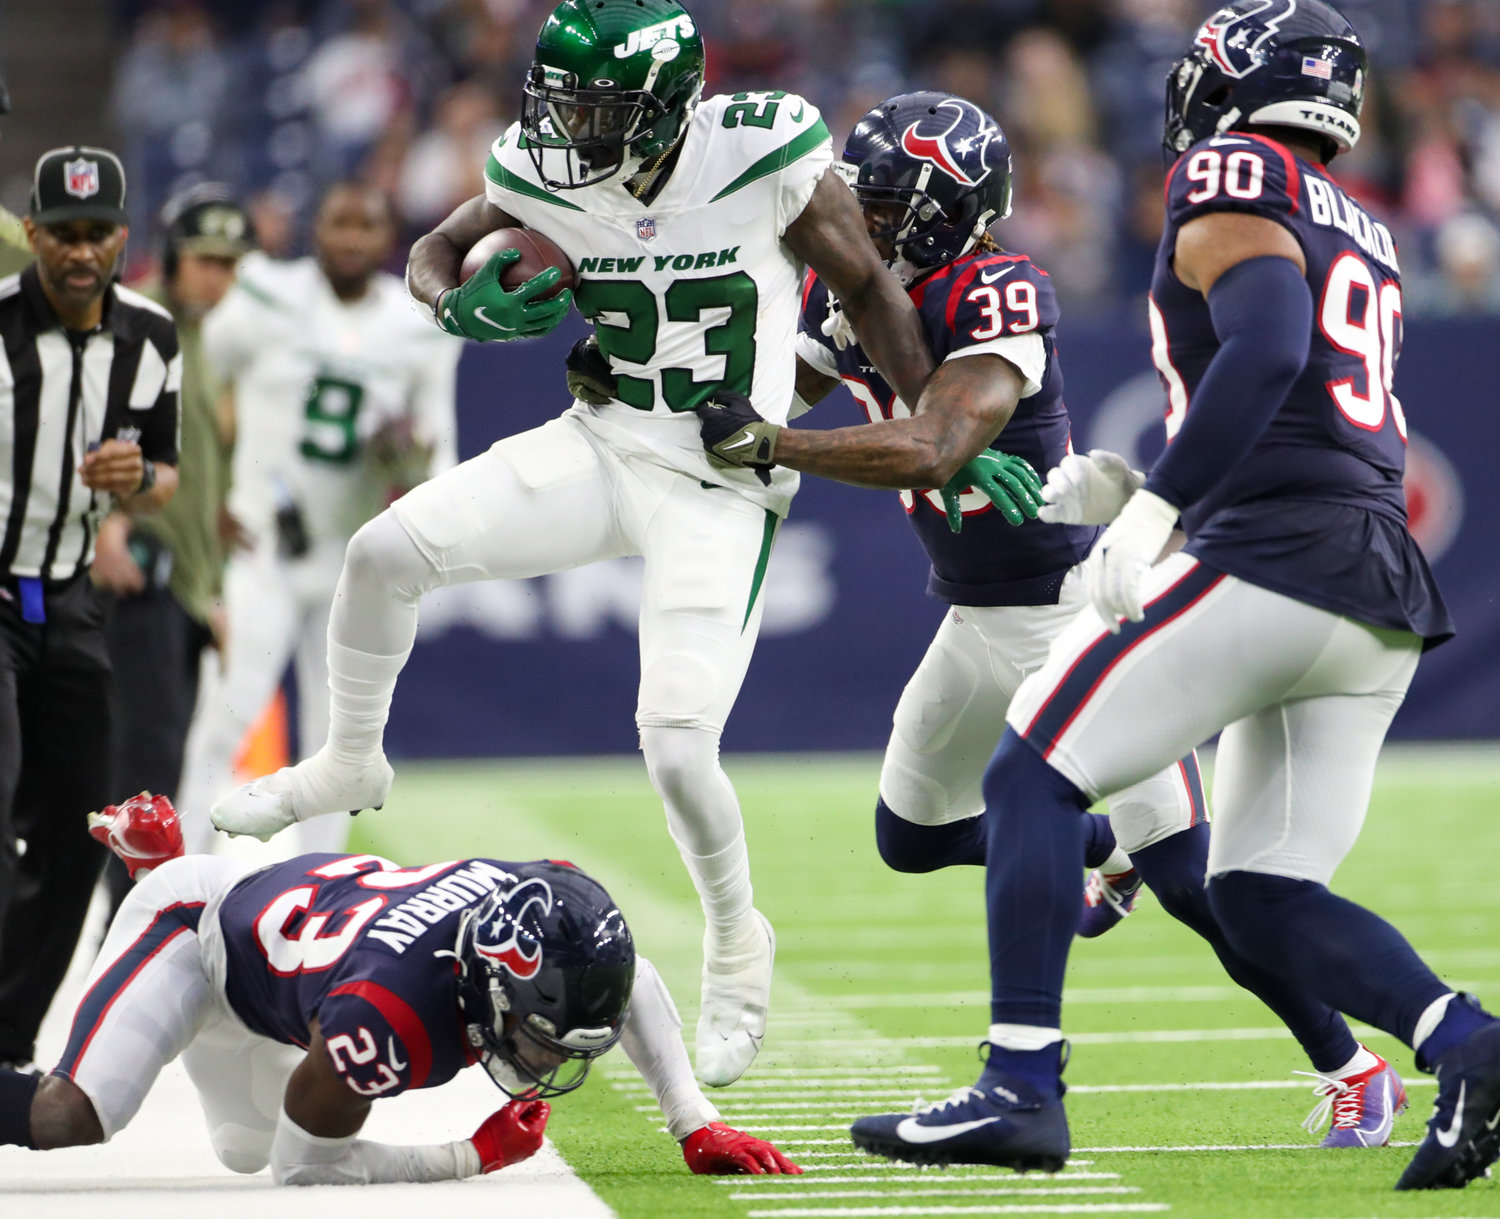 New York Jets running back Tevin Coleman (23) is run out of bounds by Houston Texans cornerback Terrance Mitchell (39) during an NFL game between the Houston Texans and the New York Jets on November 28, 2021 in Houston, Texas. The Jets won, 21-14